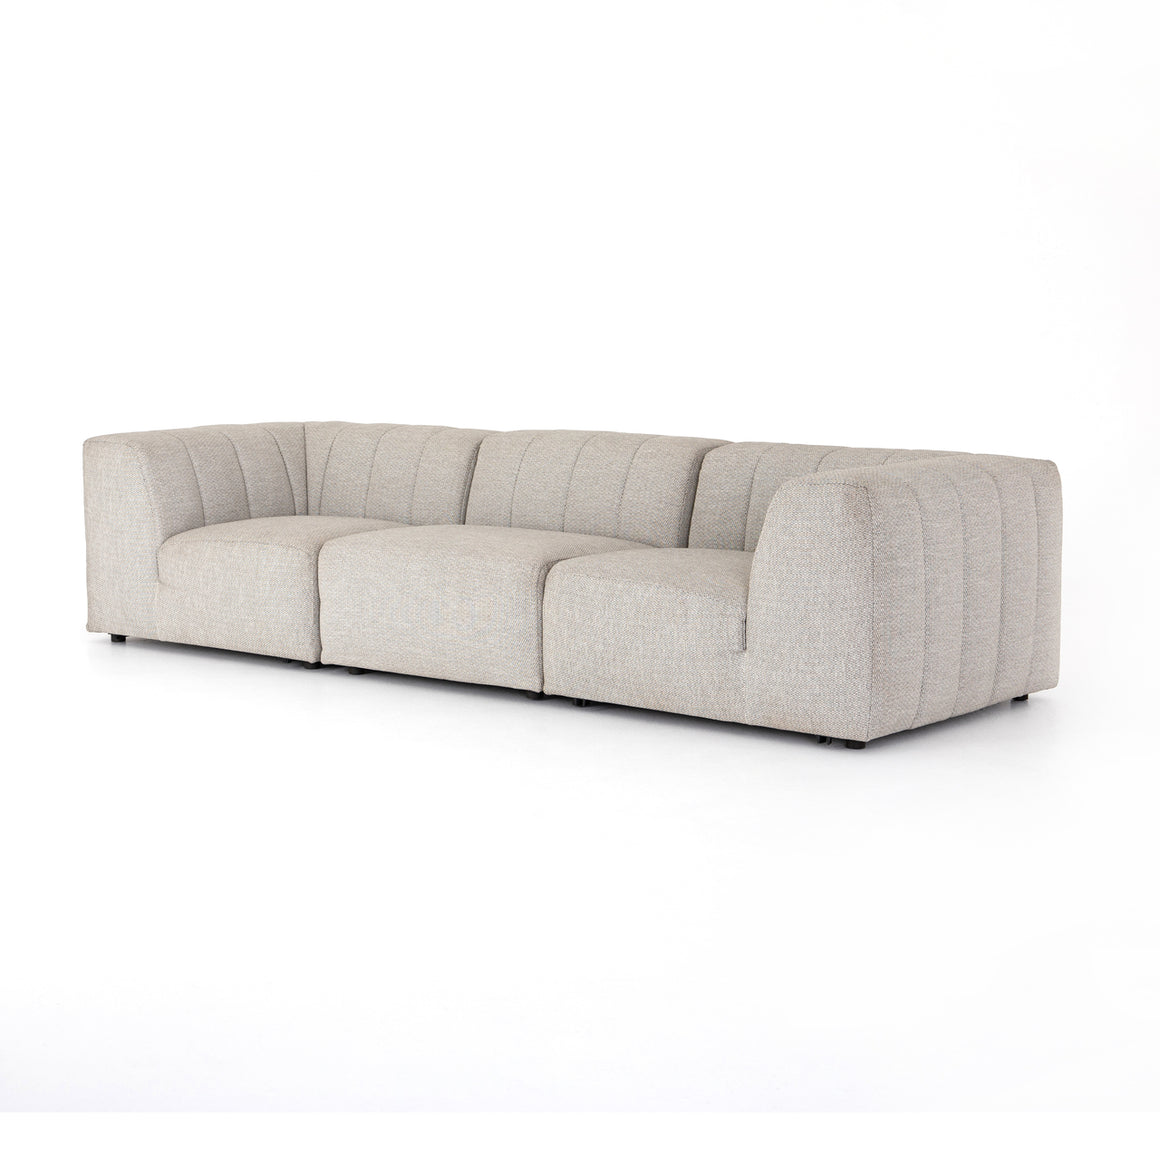 Gwen Outdoor 3 Pc Sectional